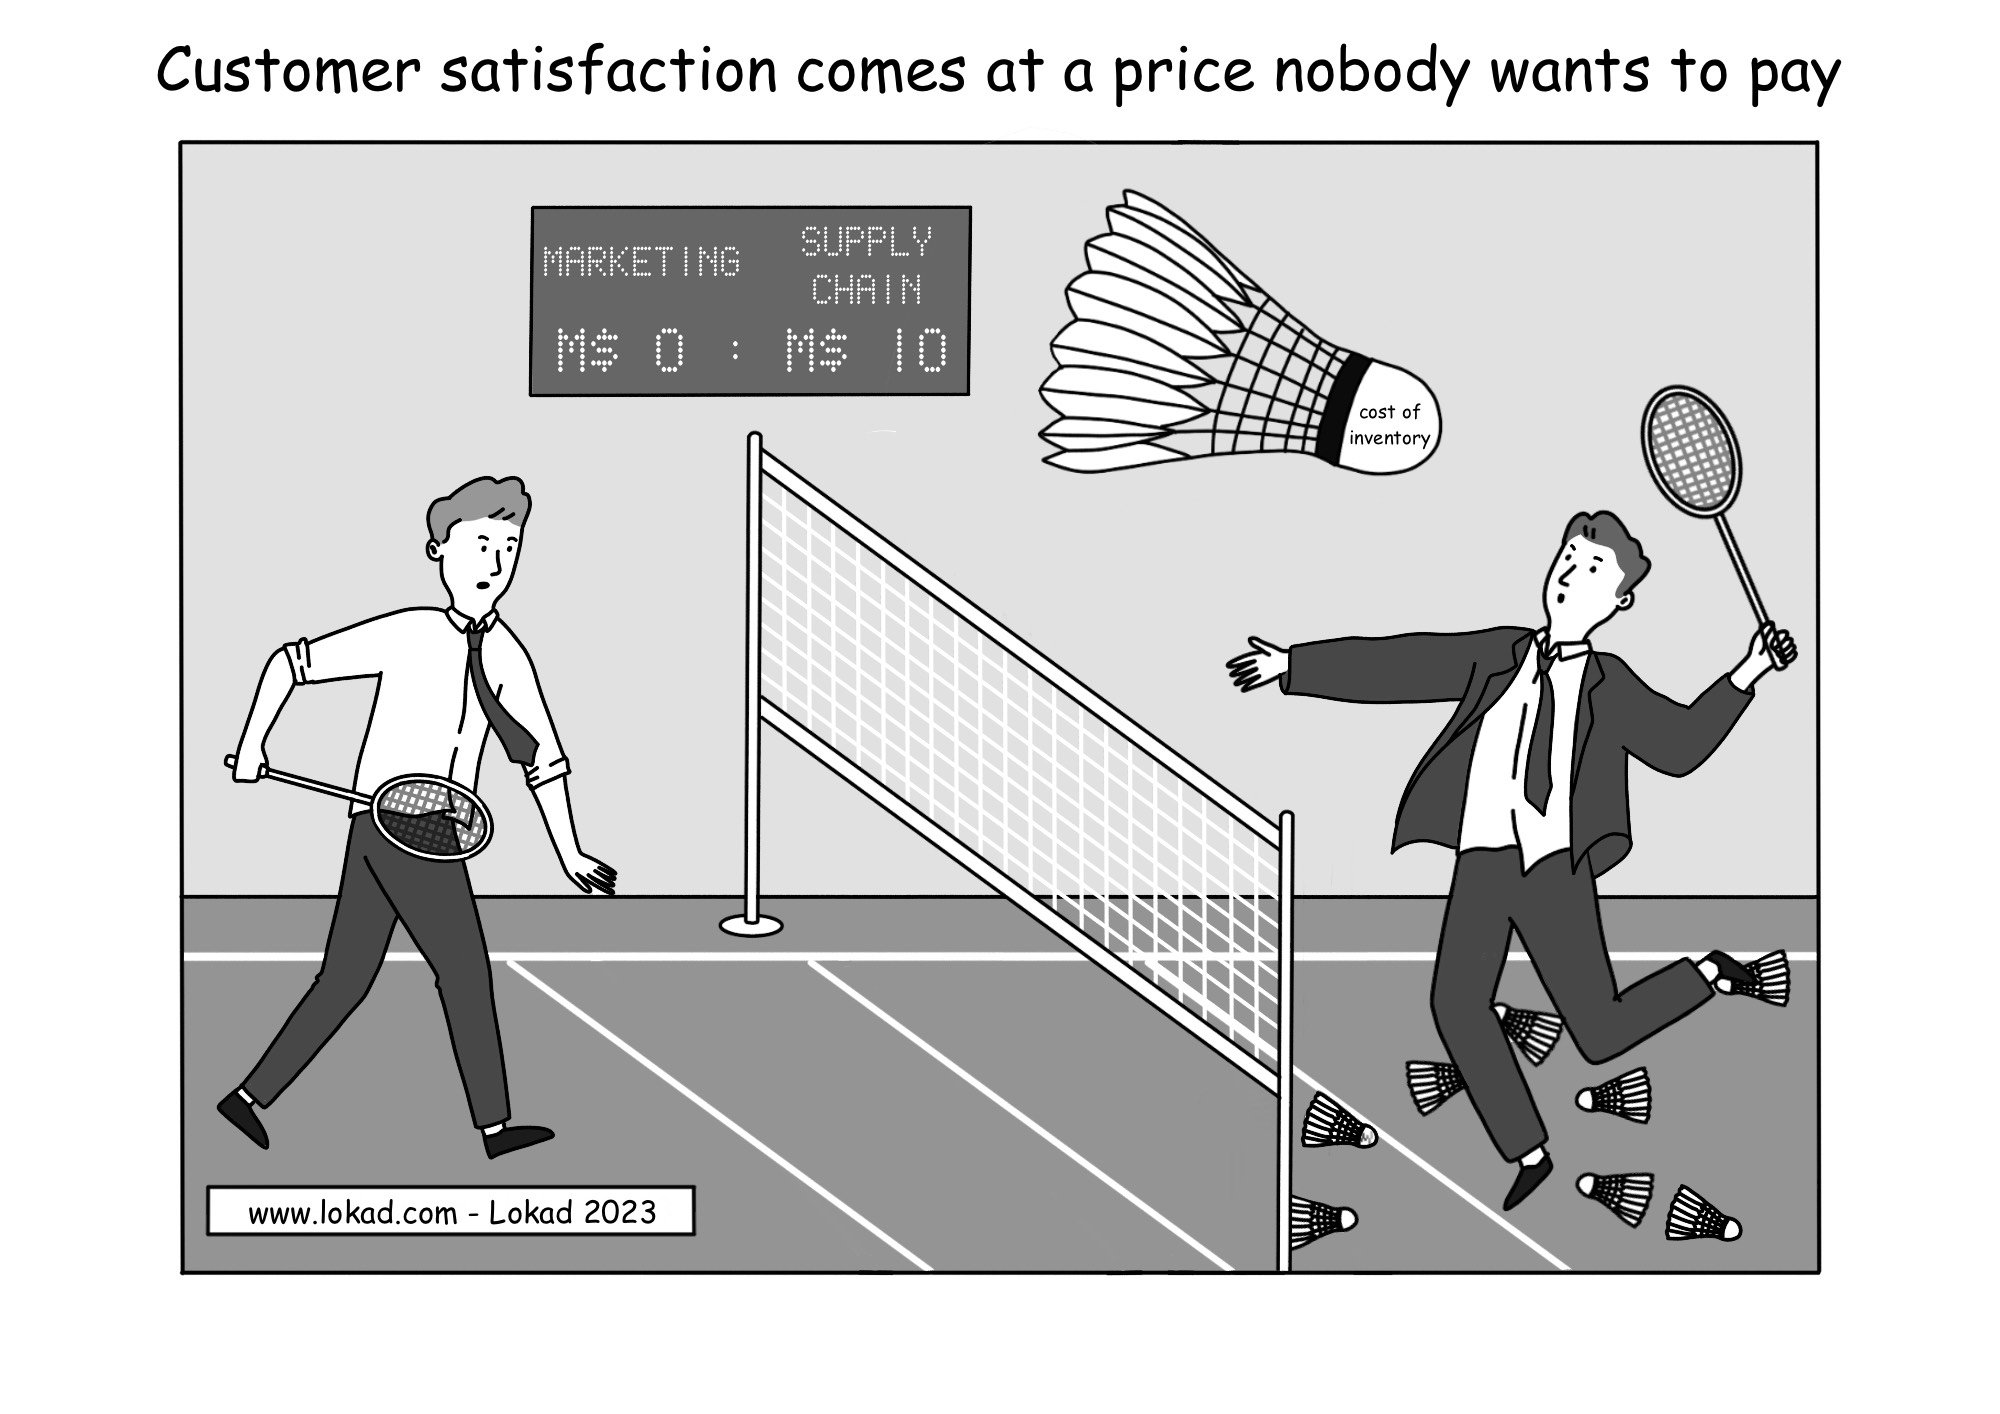 Customer satisfaction comes at a price nobody wants to pay